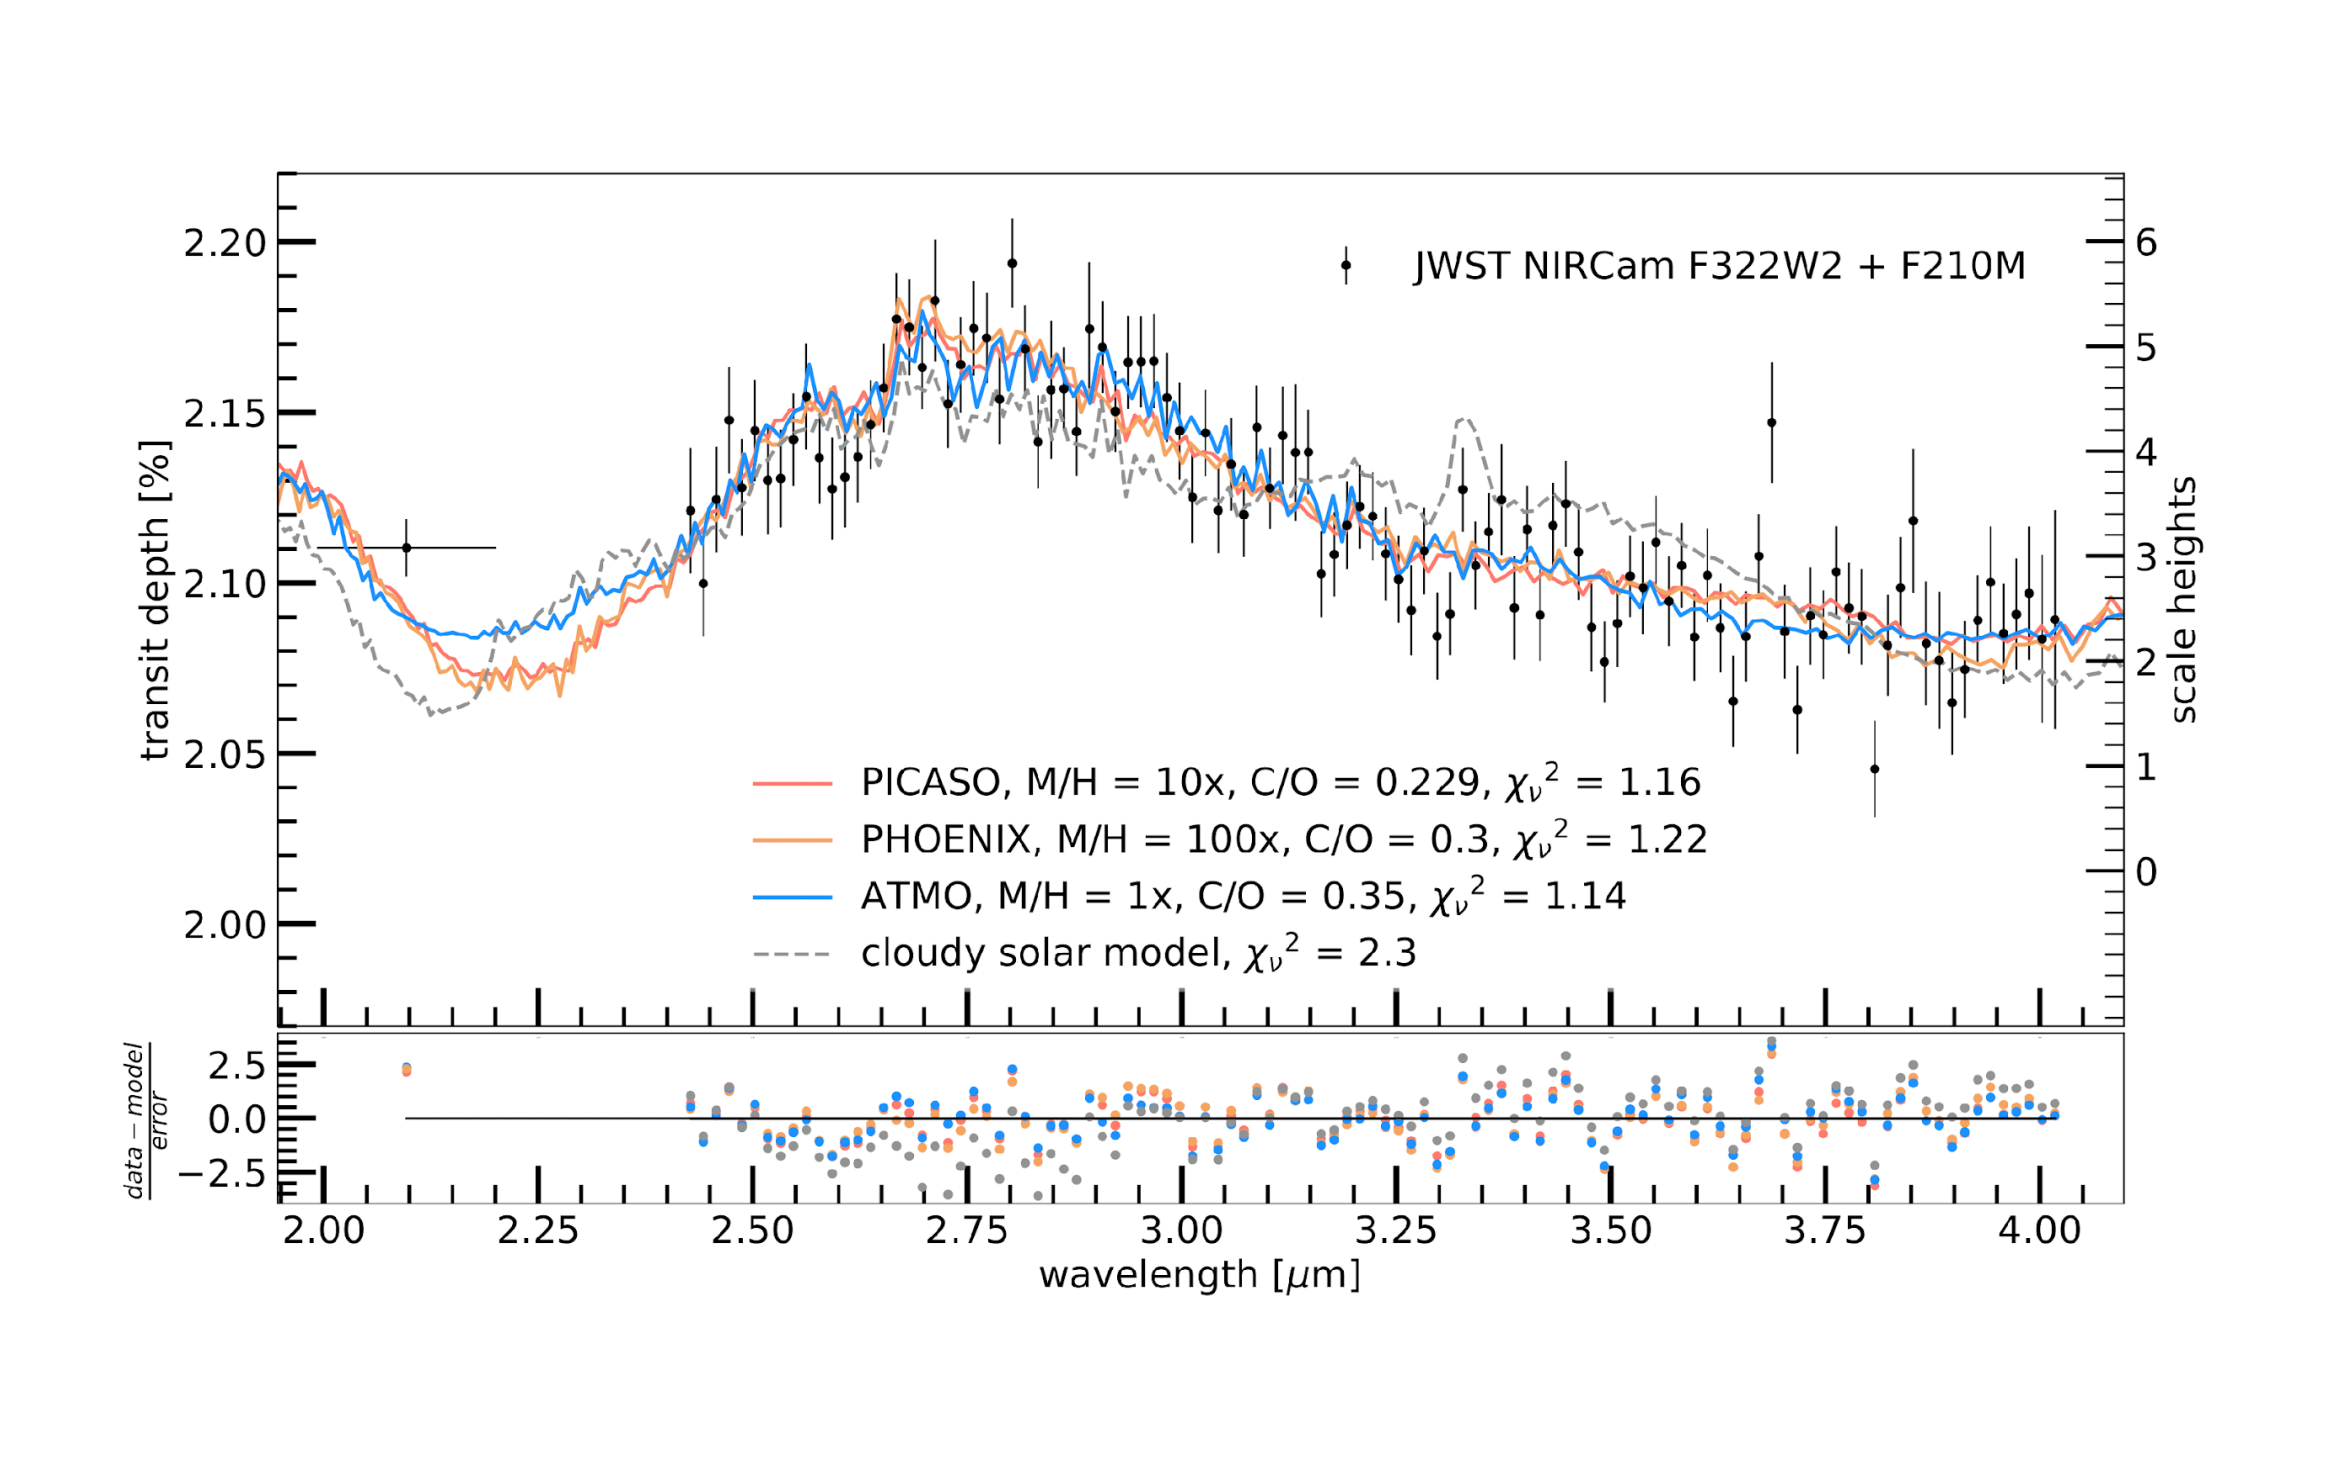 Science of the early release of exoplanet WASP-39b with JWST NIRCam